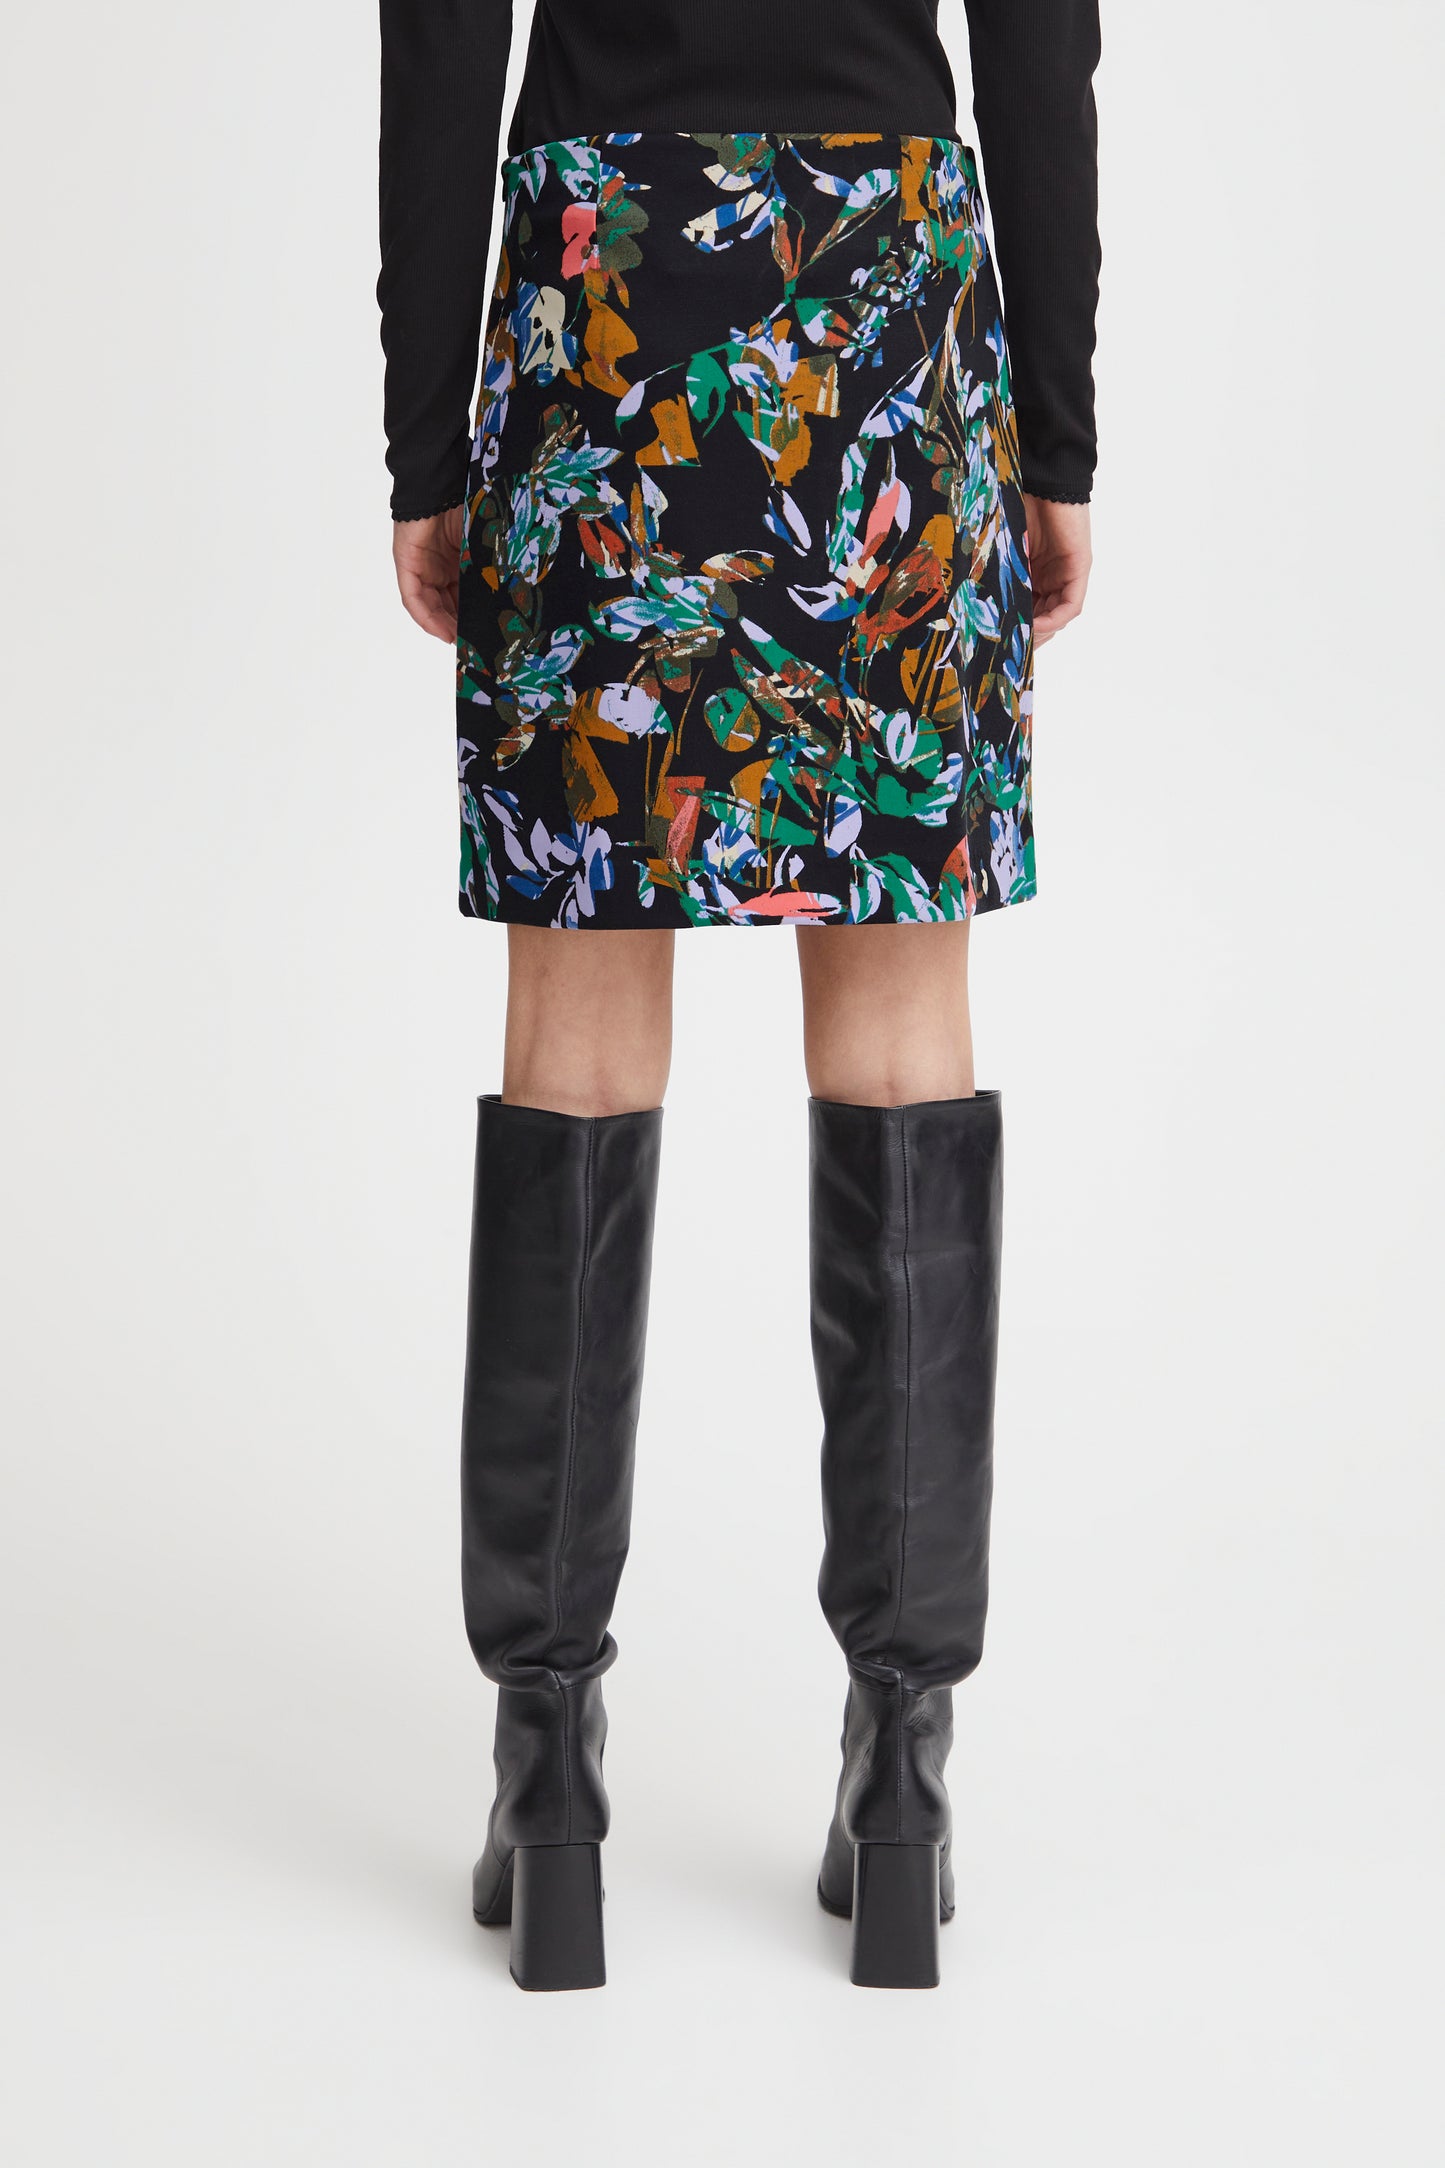 ICHI KATE Multicolored Collage Print Skirt